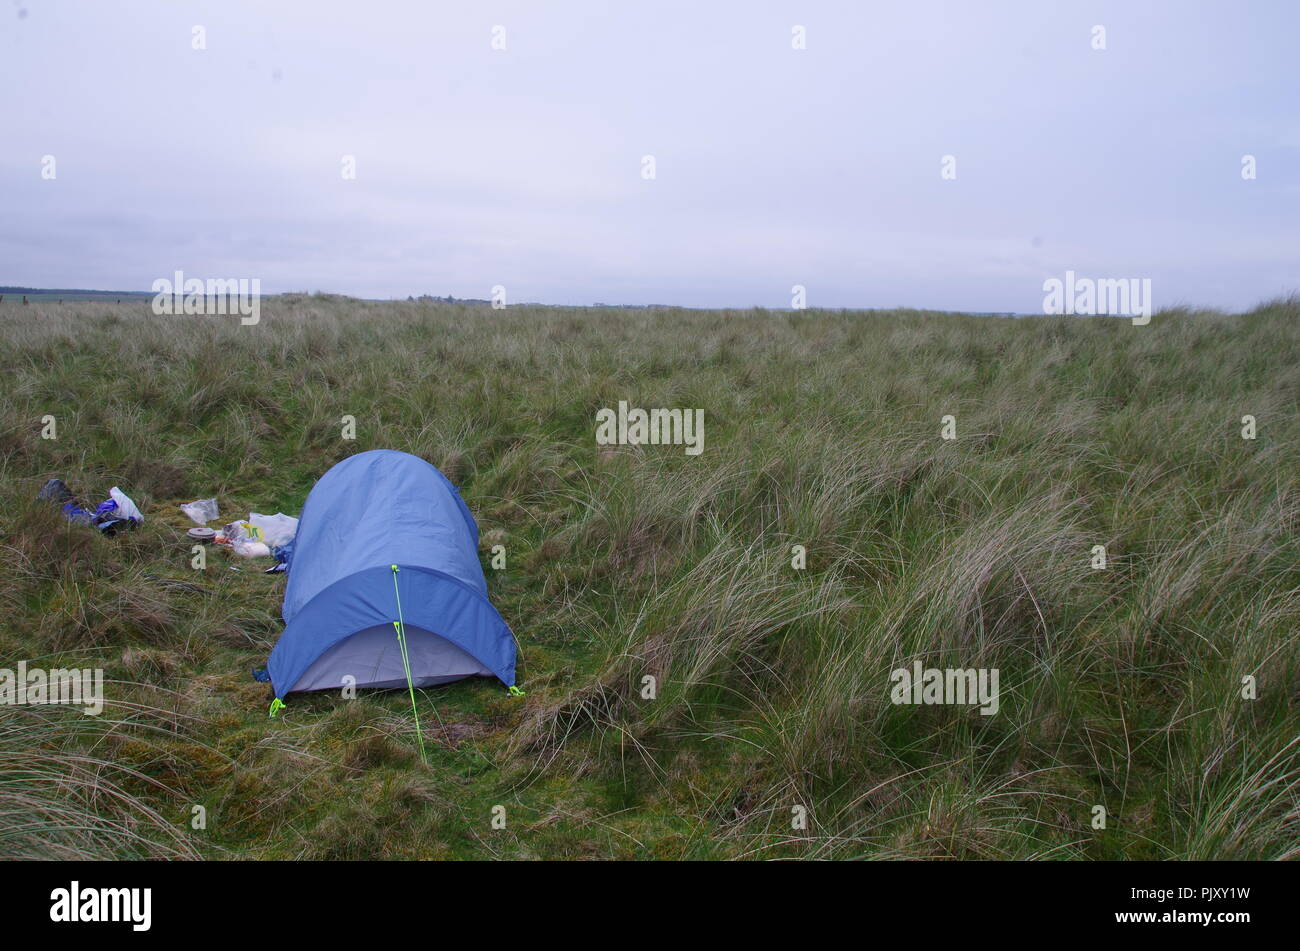 Wild camping. Sinclairs Bay. John o' groats (Duncansby head) to lands end. Cornwall. End to end trail. Caithness. Scotland. UK Stock Photo